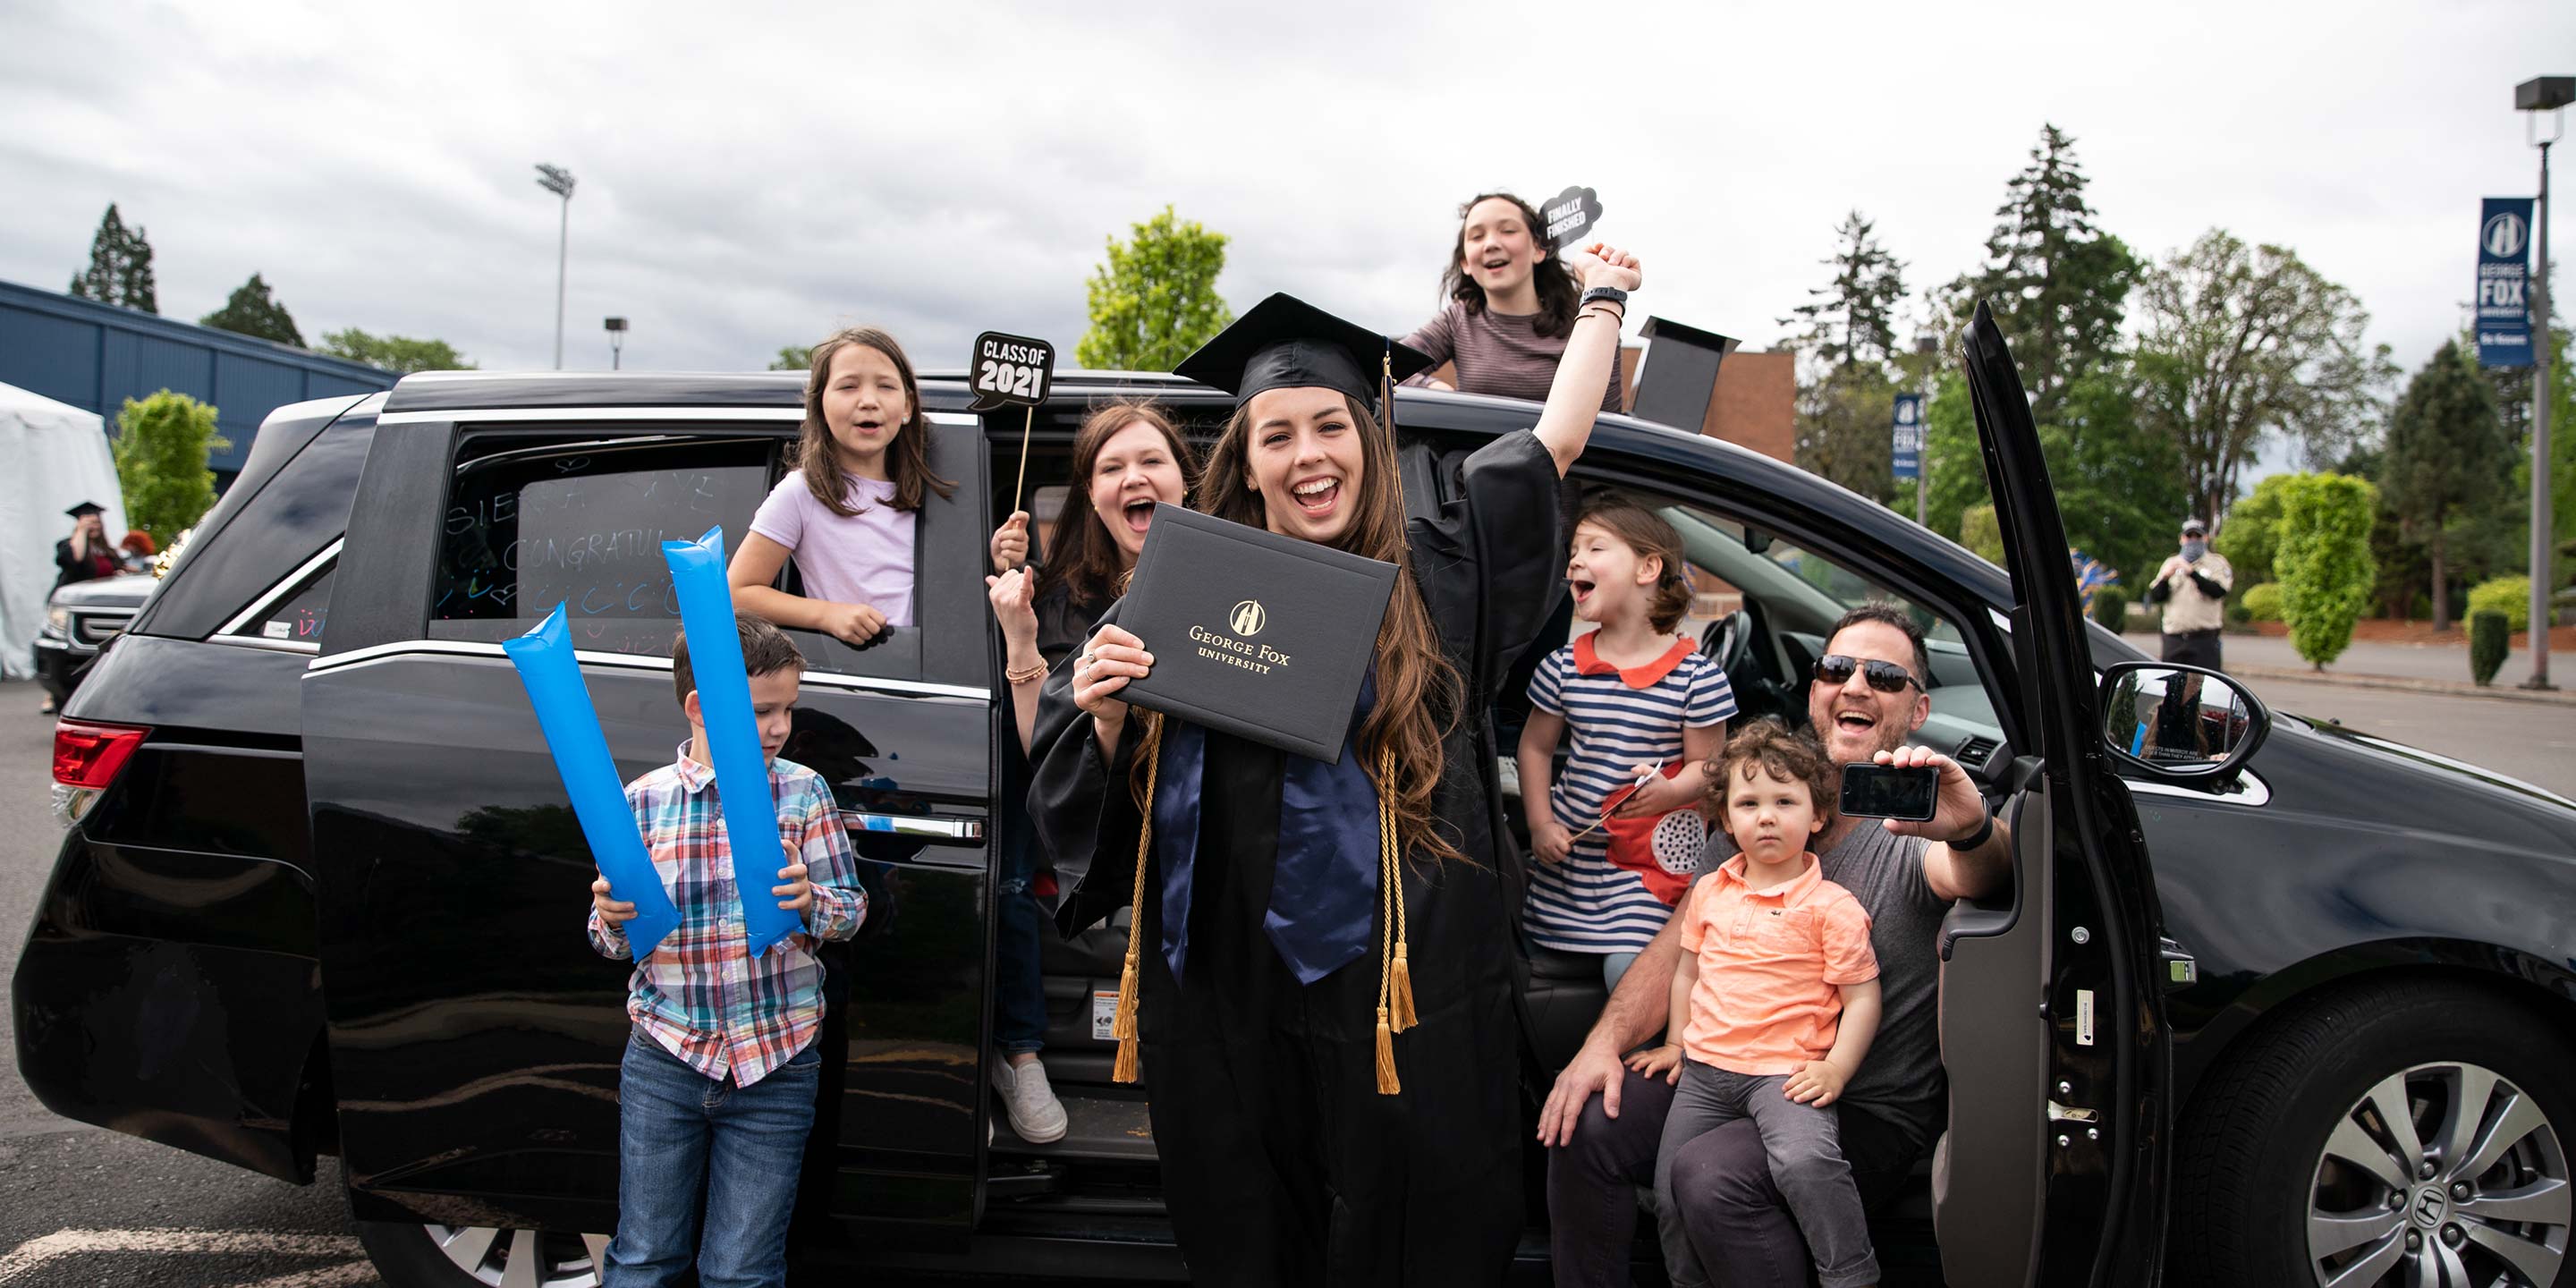 Get to Know the Class of 2021 George Fox University